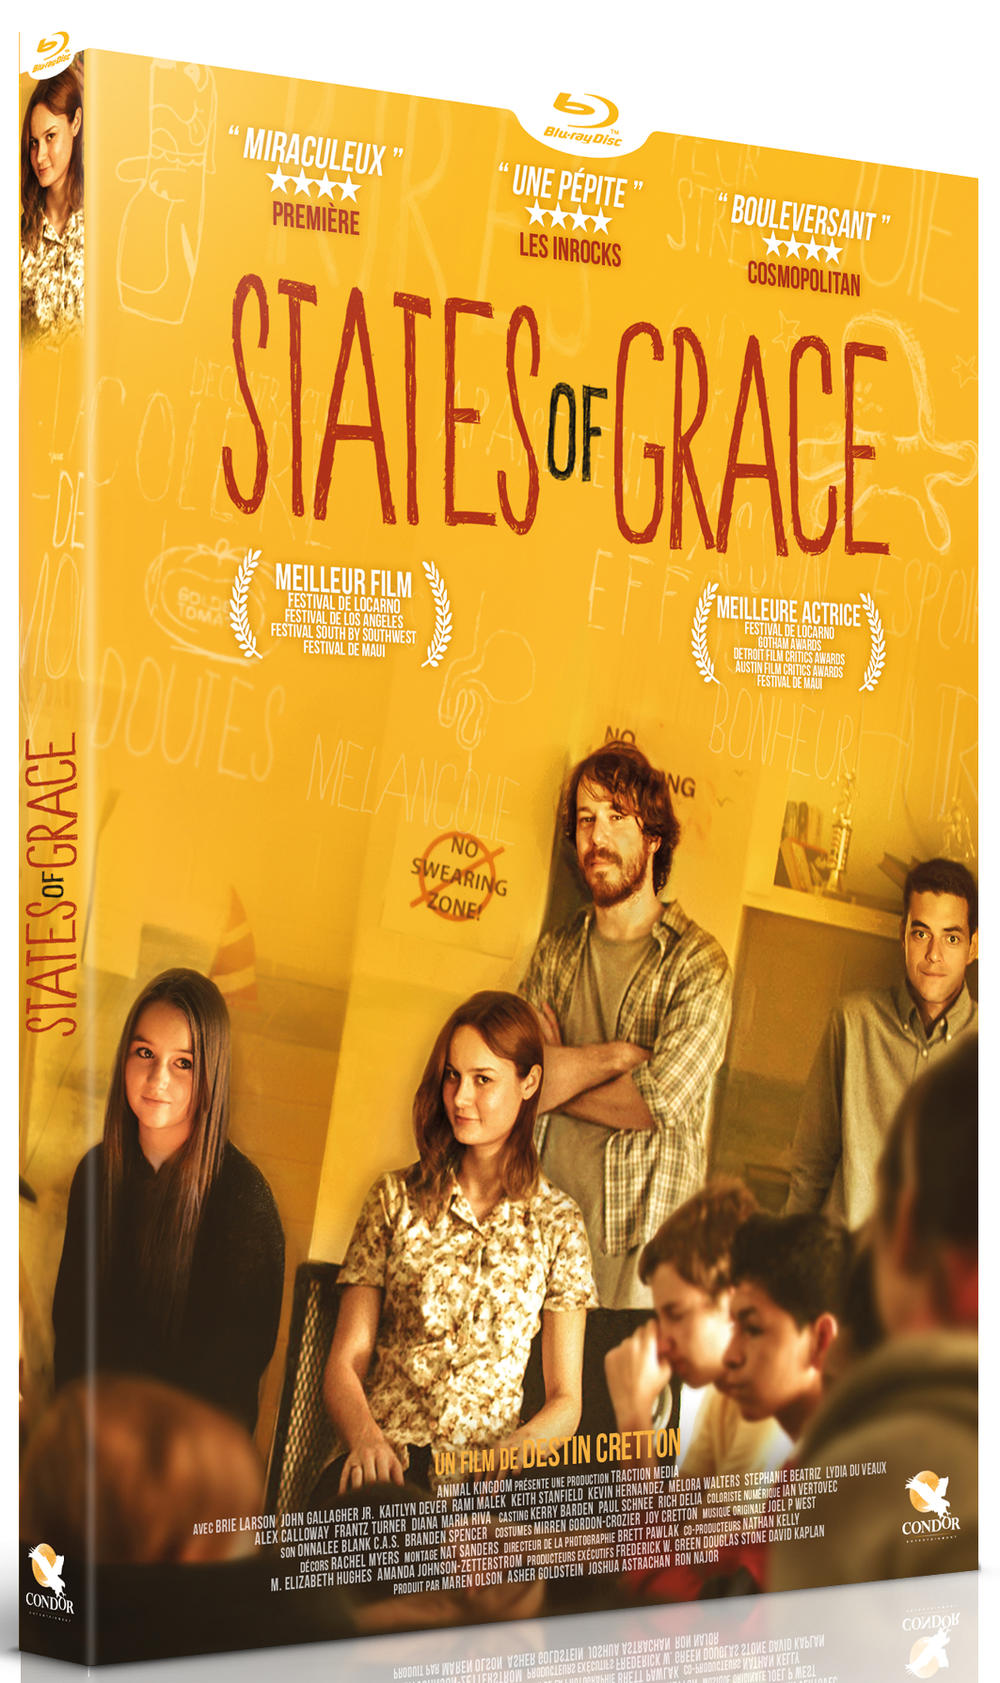 STATES OF GRACE